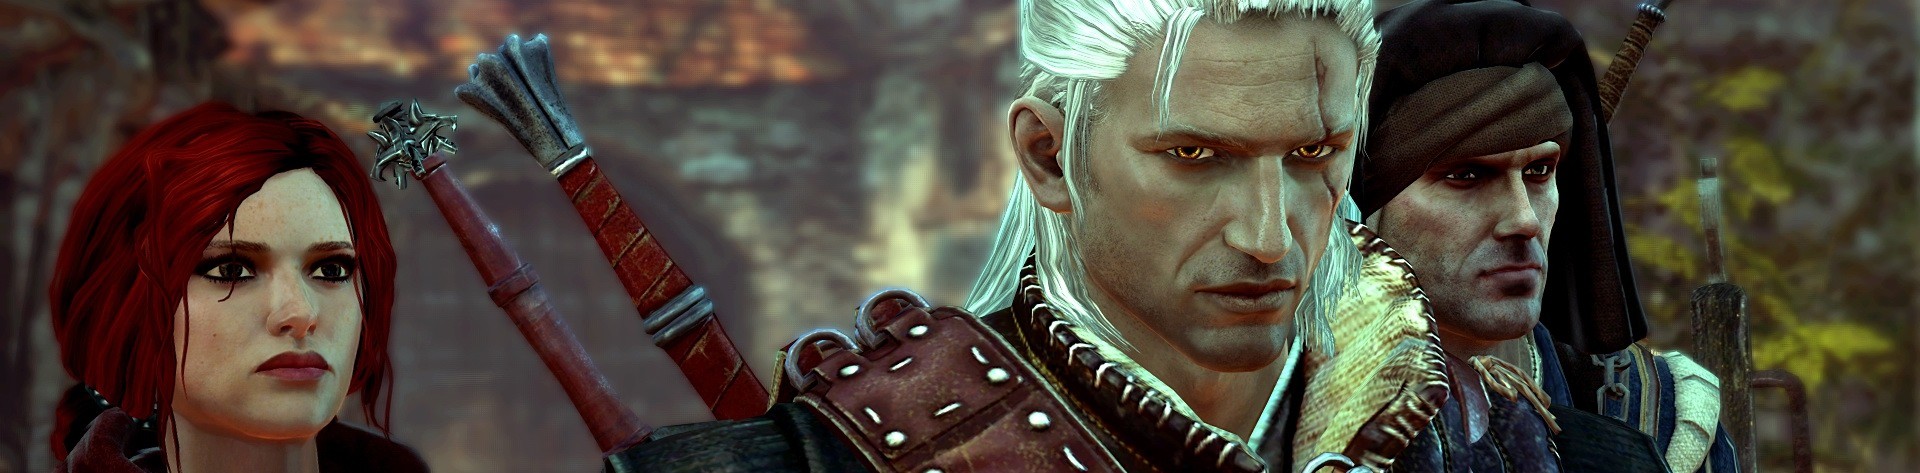 The Witcher 2 - Assassins of Kings 3